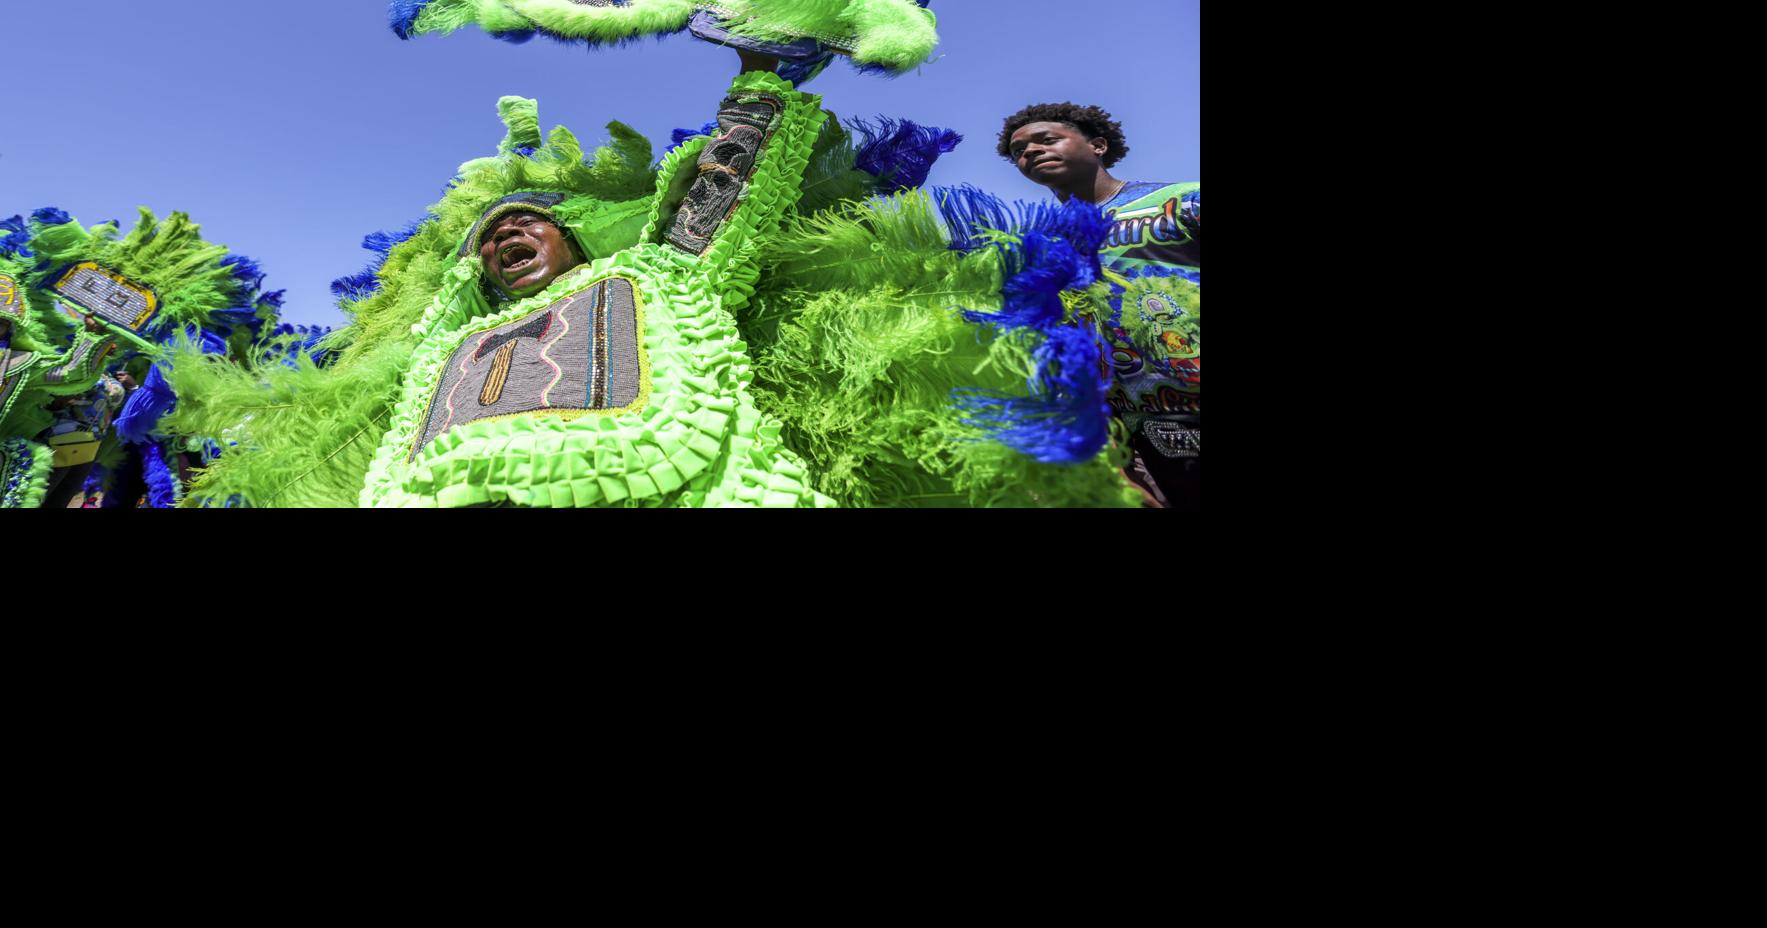 Downtown Mardi Gras Indian march hits the streets of New Orleans on Sunday